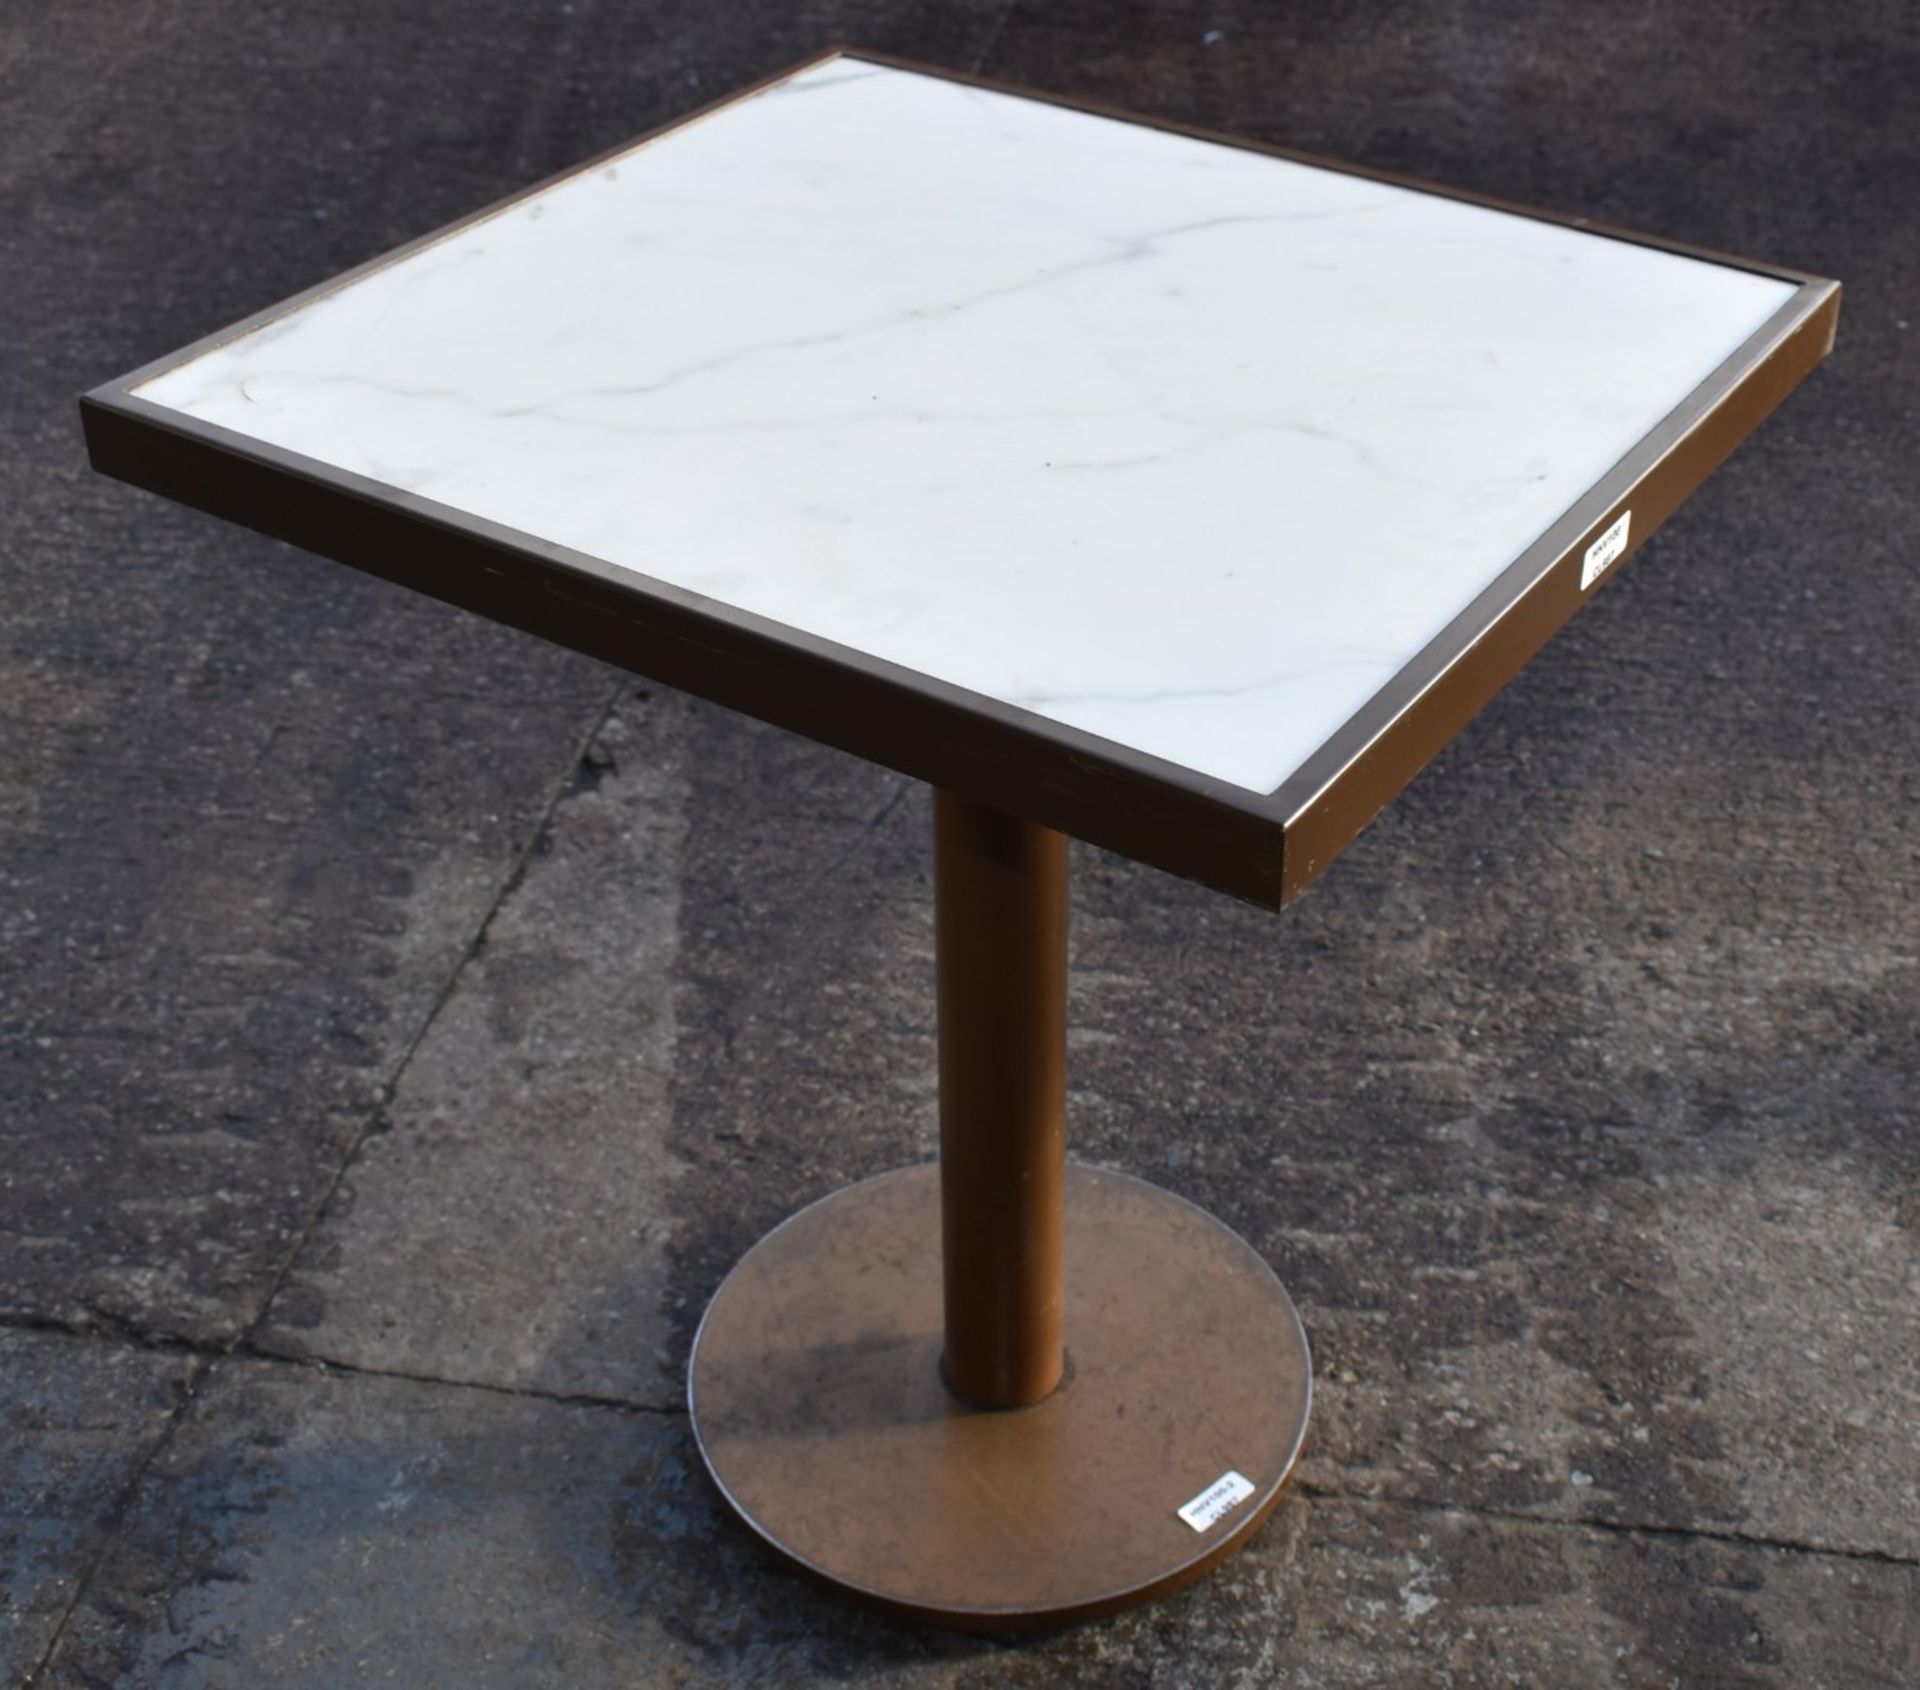 3 x Marble Topped Bistro Tables With Sturdy Metal Frames - Image 2 of 4